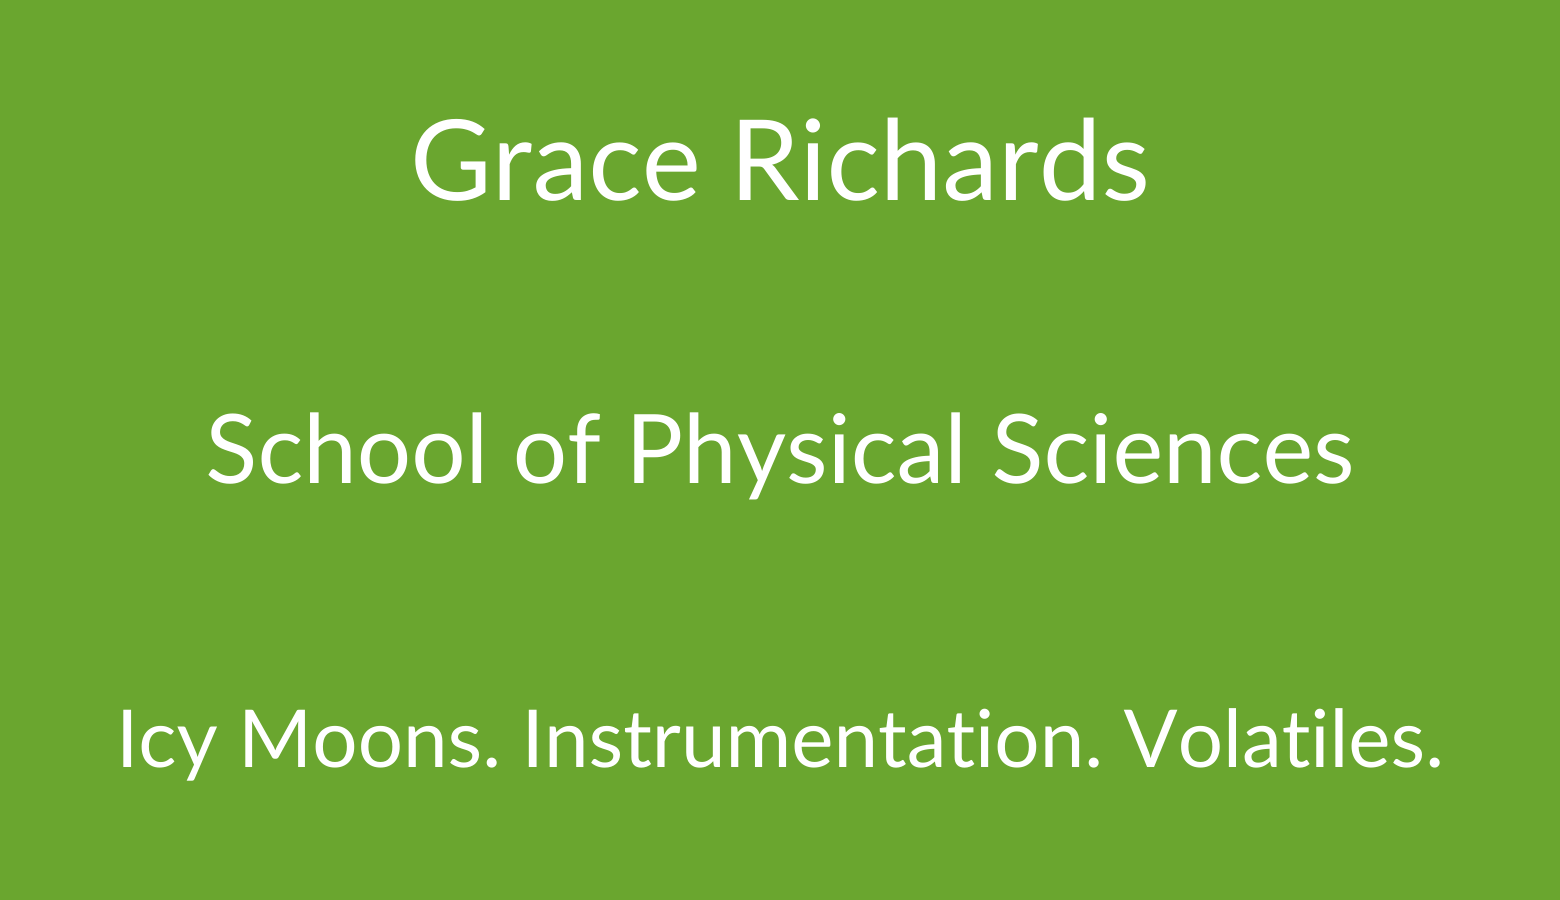 Grace Richards. School of Physical Sciences. Icy Moons. Instrumentation. Volatiles.